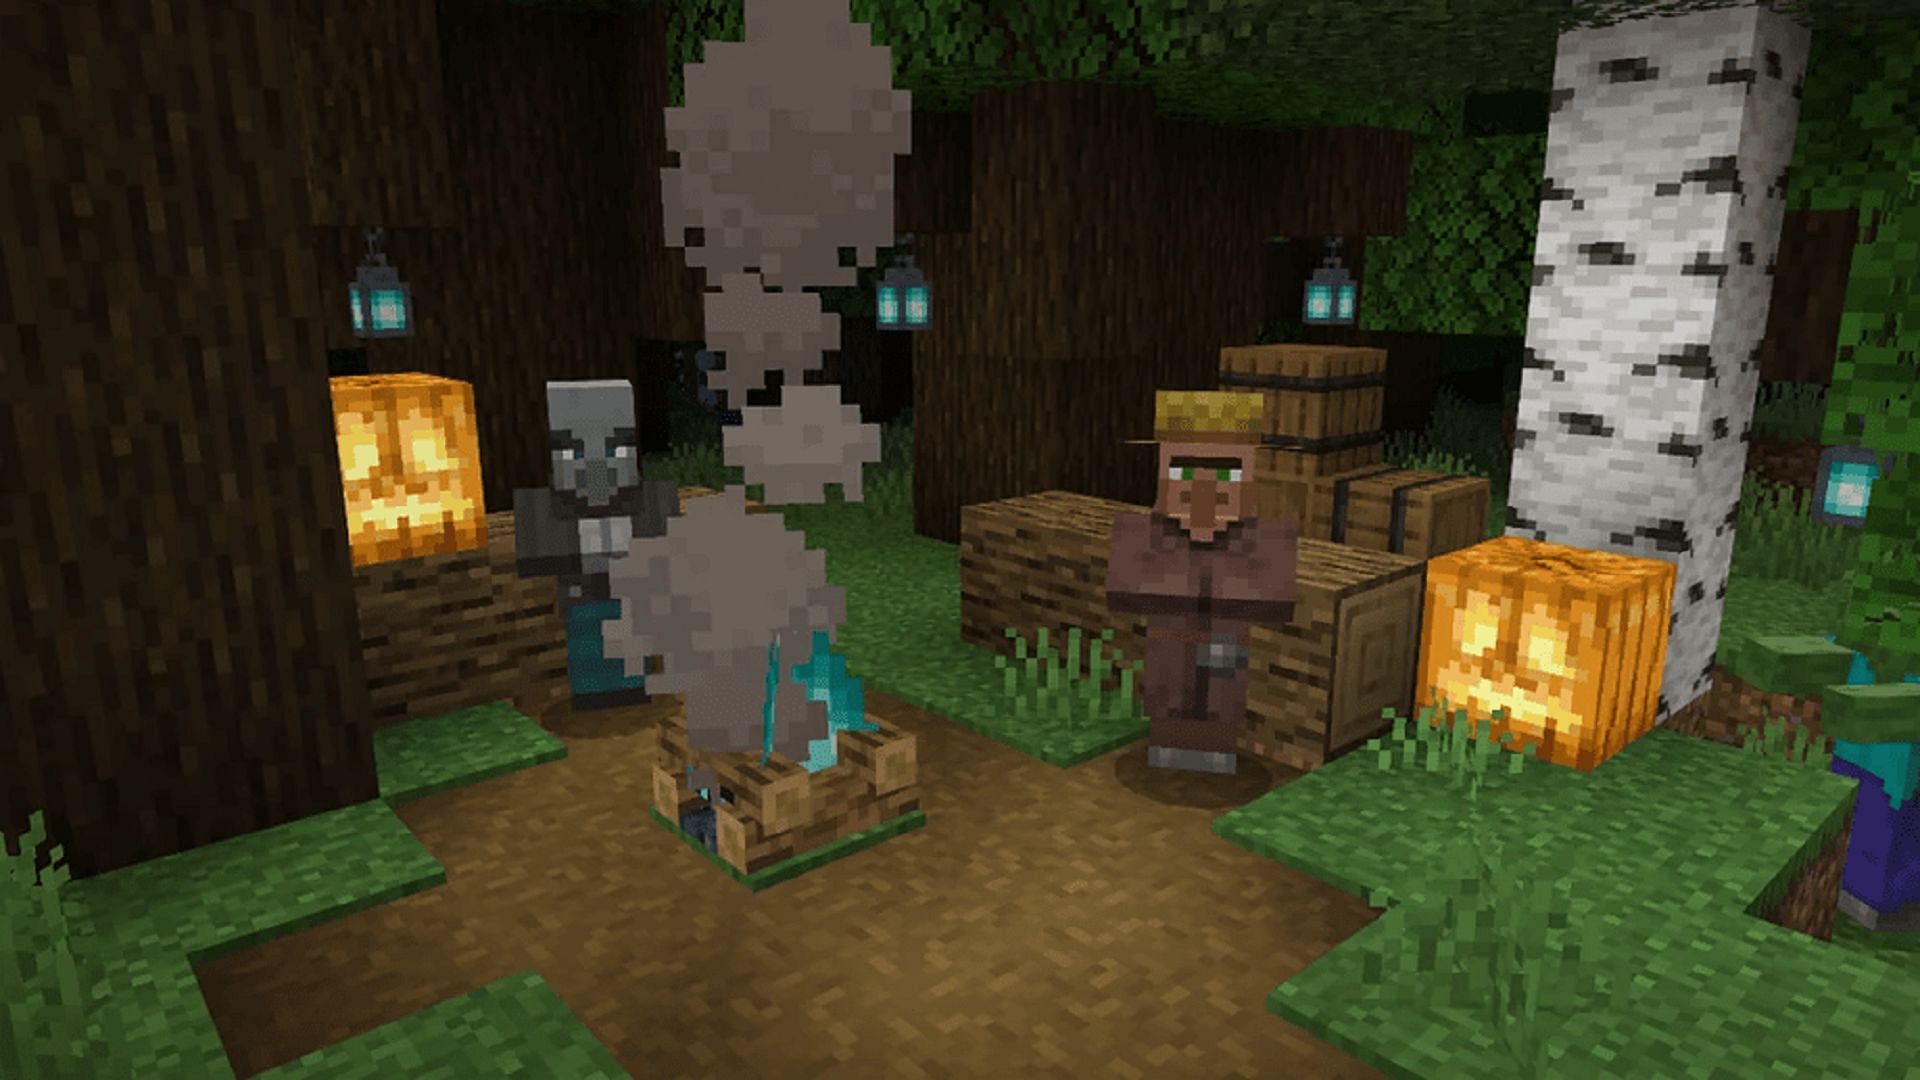 Minecraft Update 2.44 Rolled Out for New Features in Patch 1.19.10